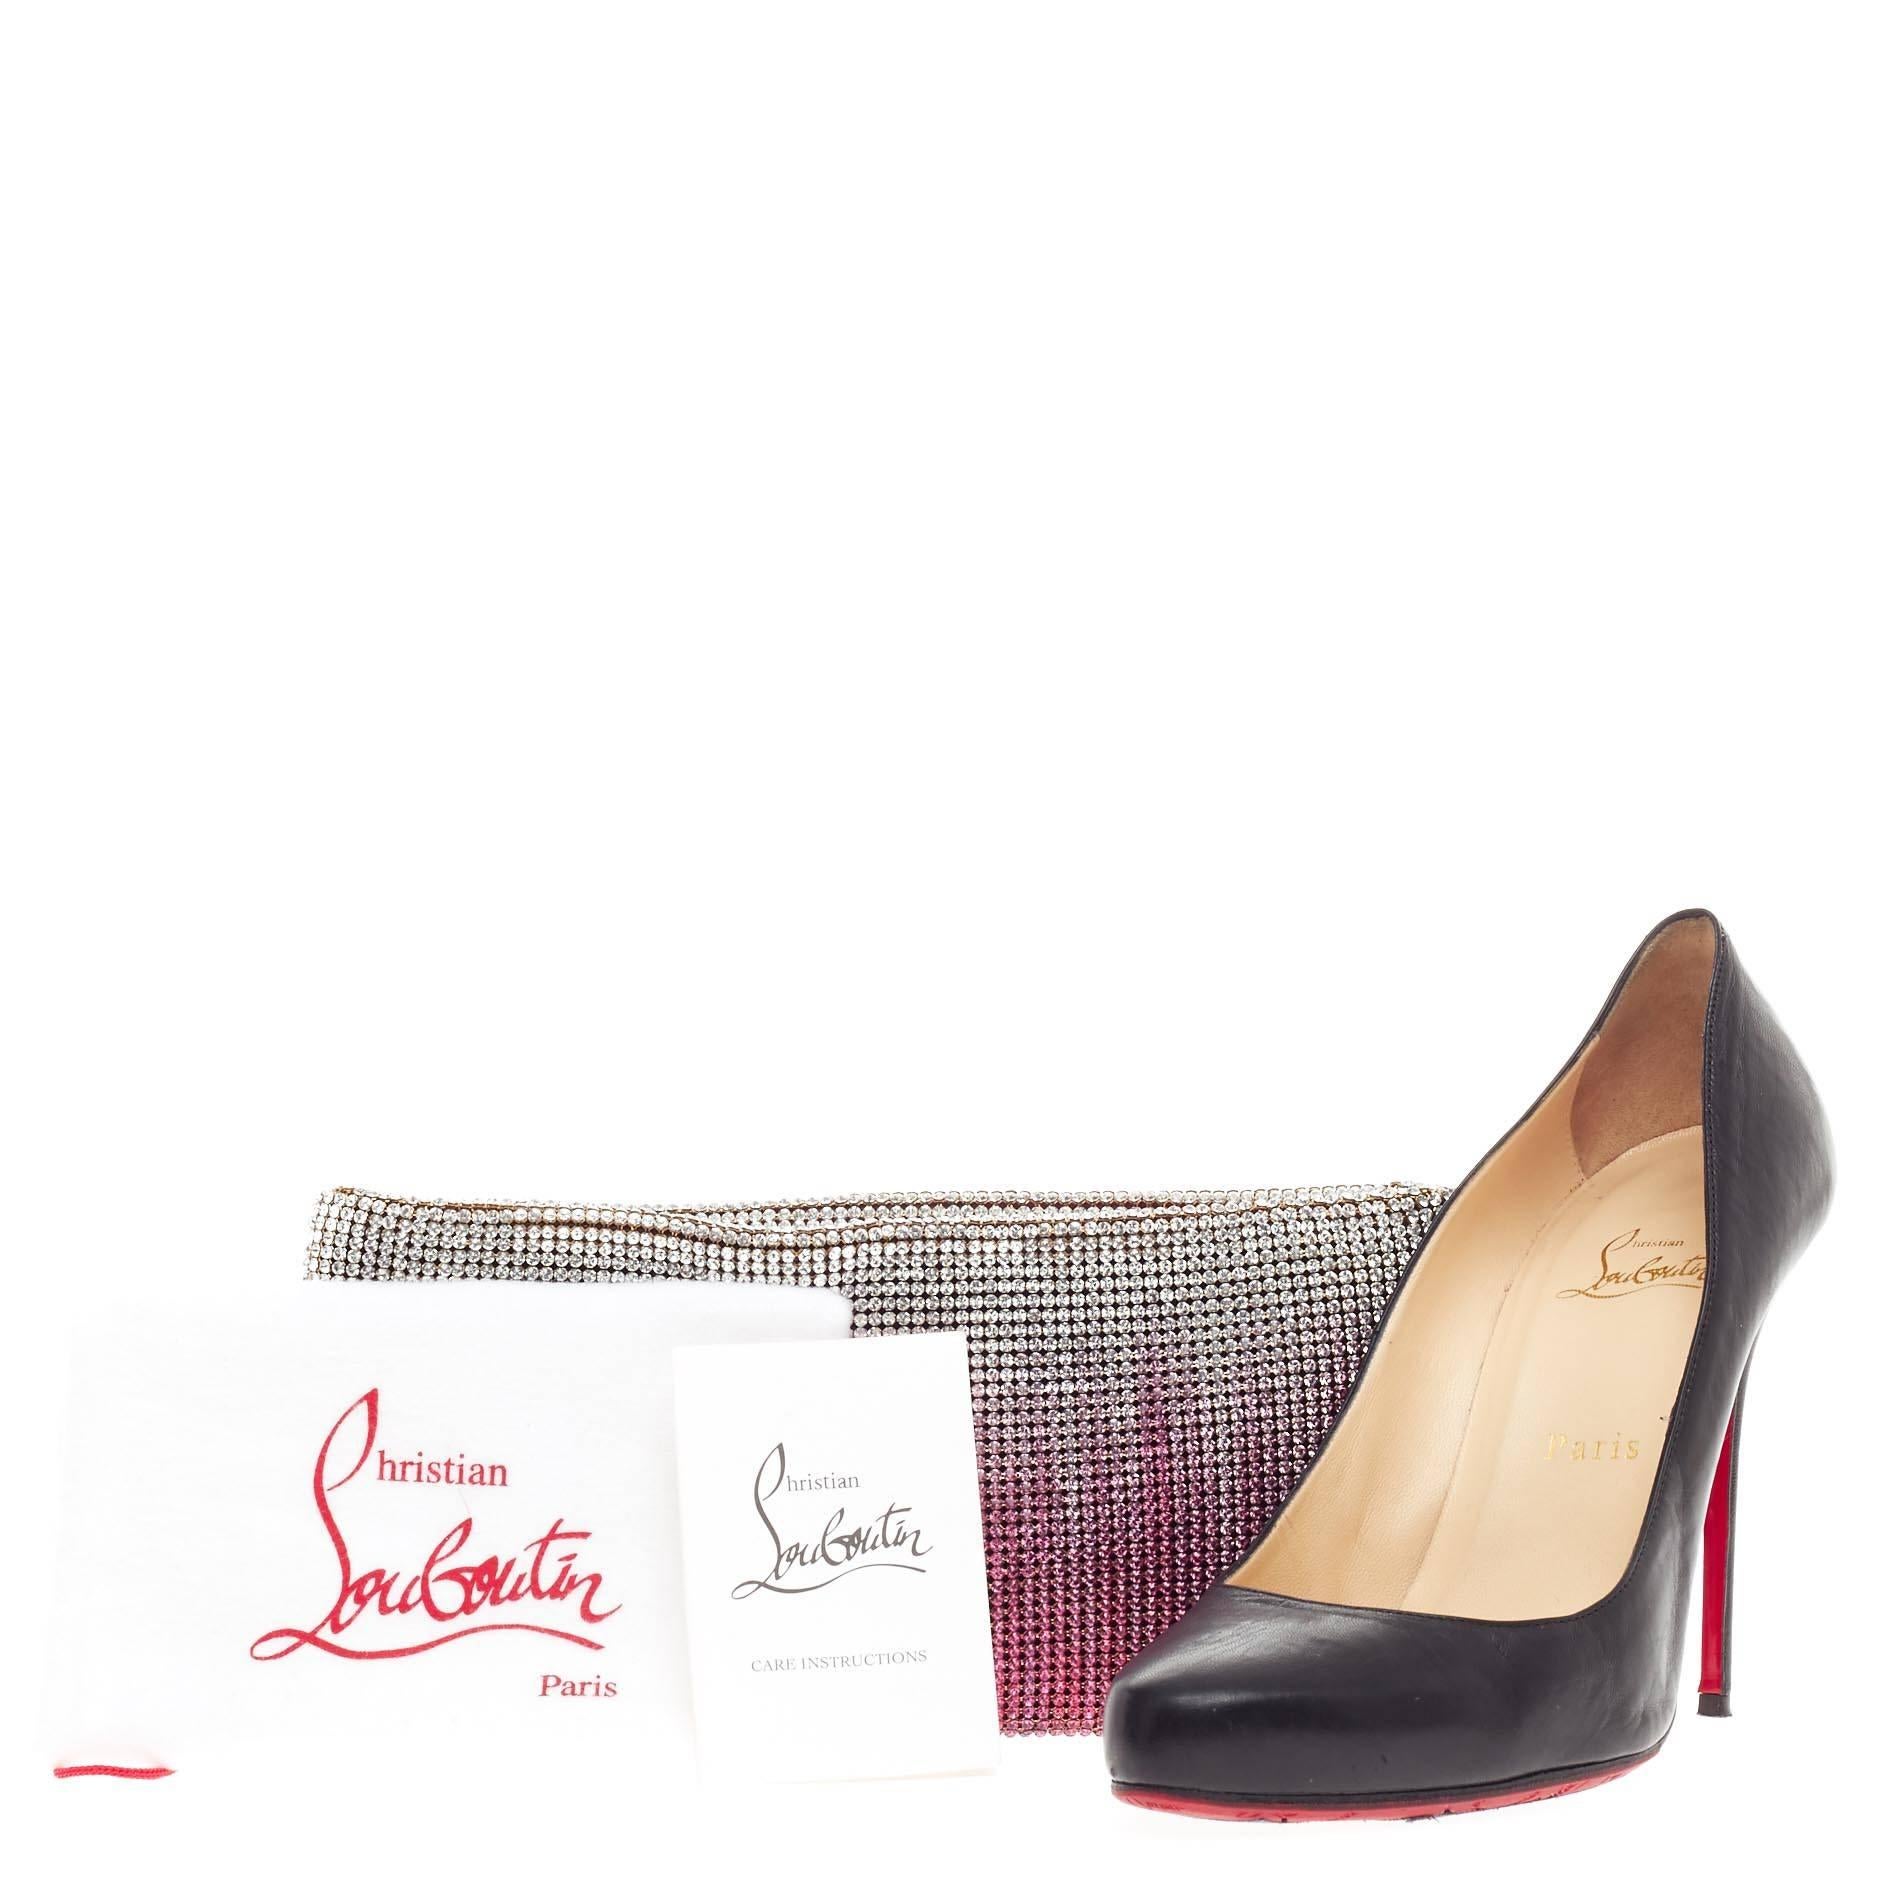 This authentic Christian Louboutin Maykimay Clutch Strass released for the designer's 20th Anniversary exudes a fun and luxurious style perfect to carry around on night outs. Crafted from shimmering pink and silver strass crystals in an eye-catching